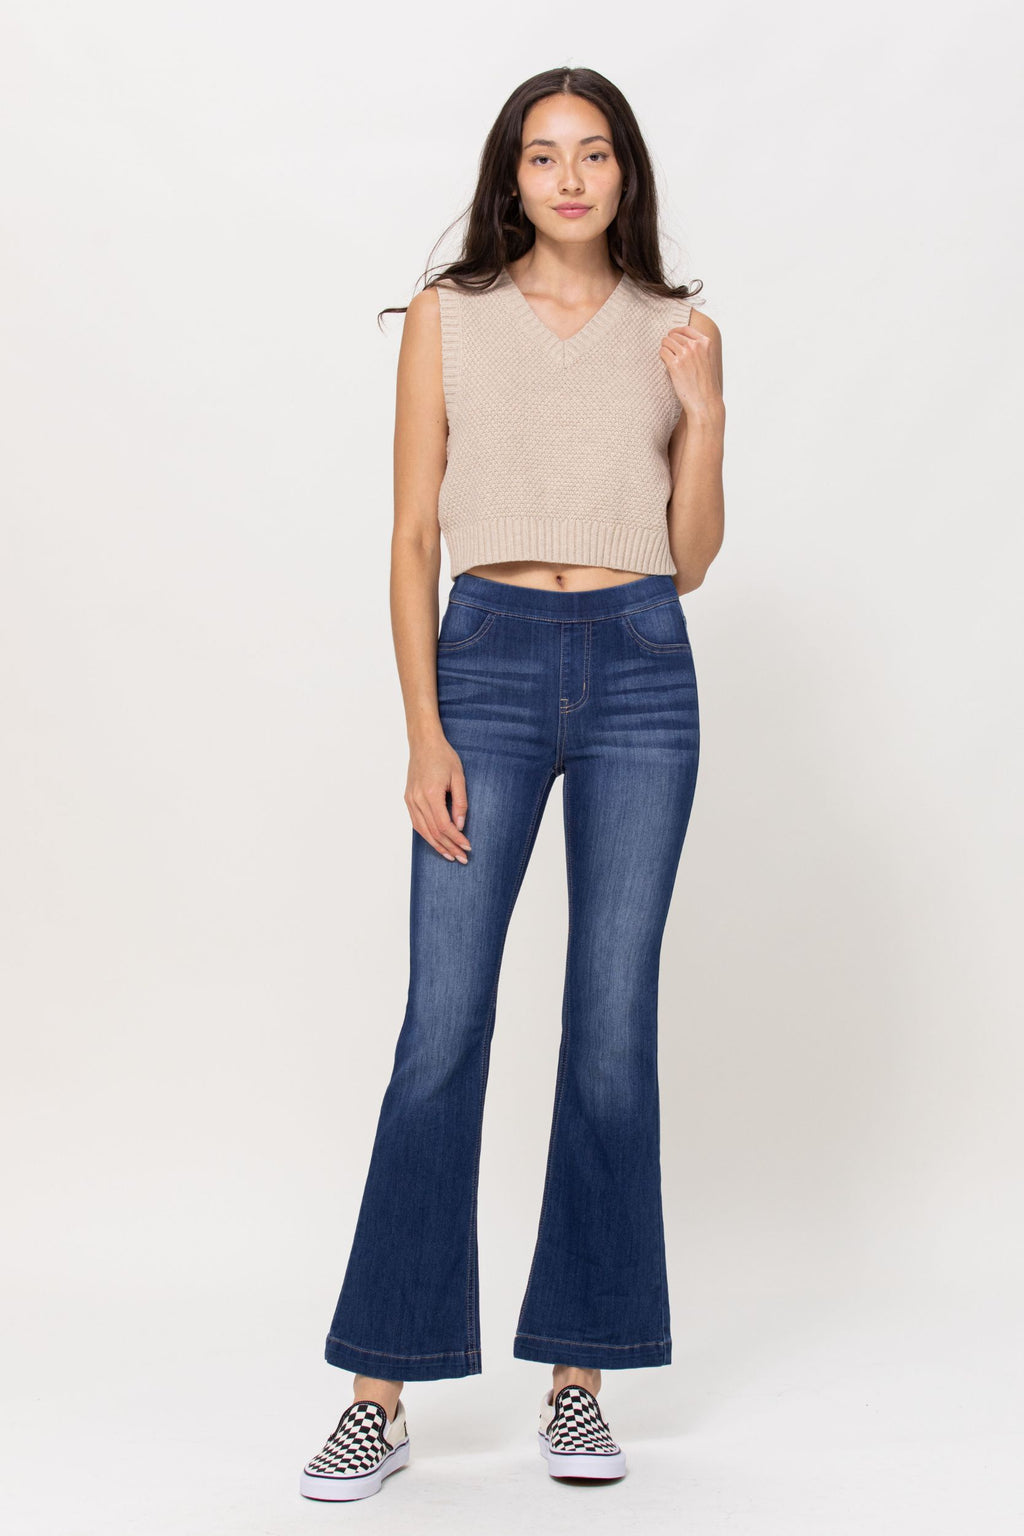 Cello Jeans – Taylor's Boutique and Tanning